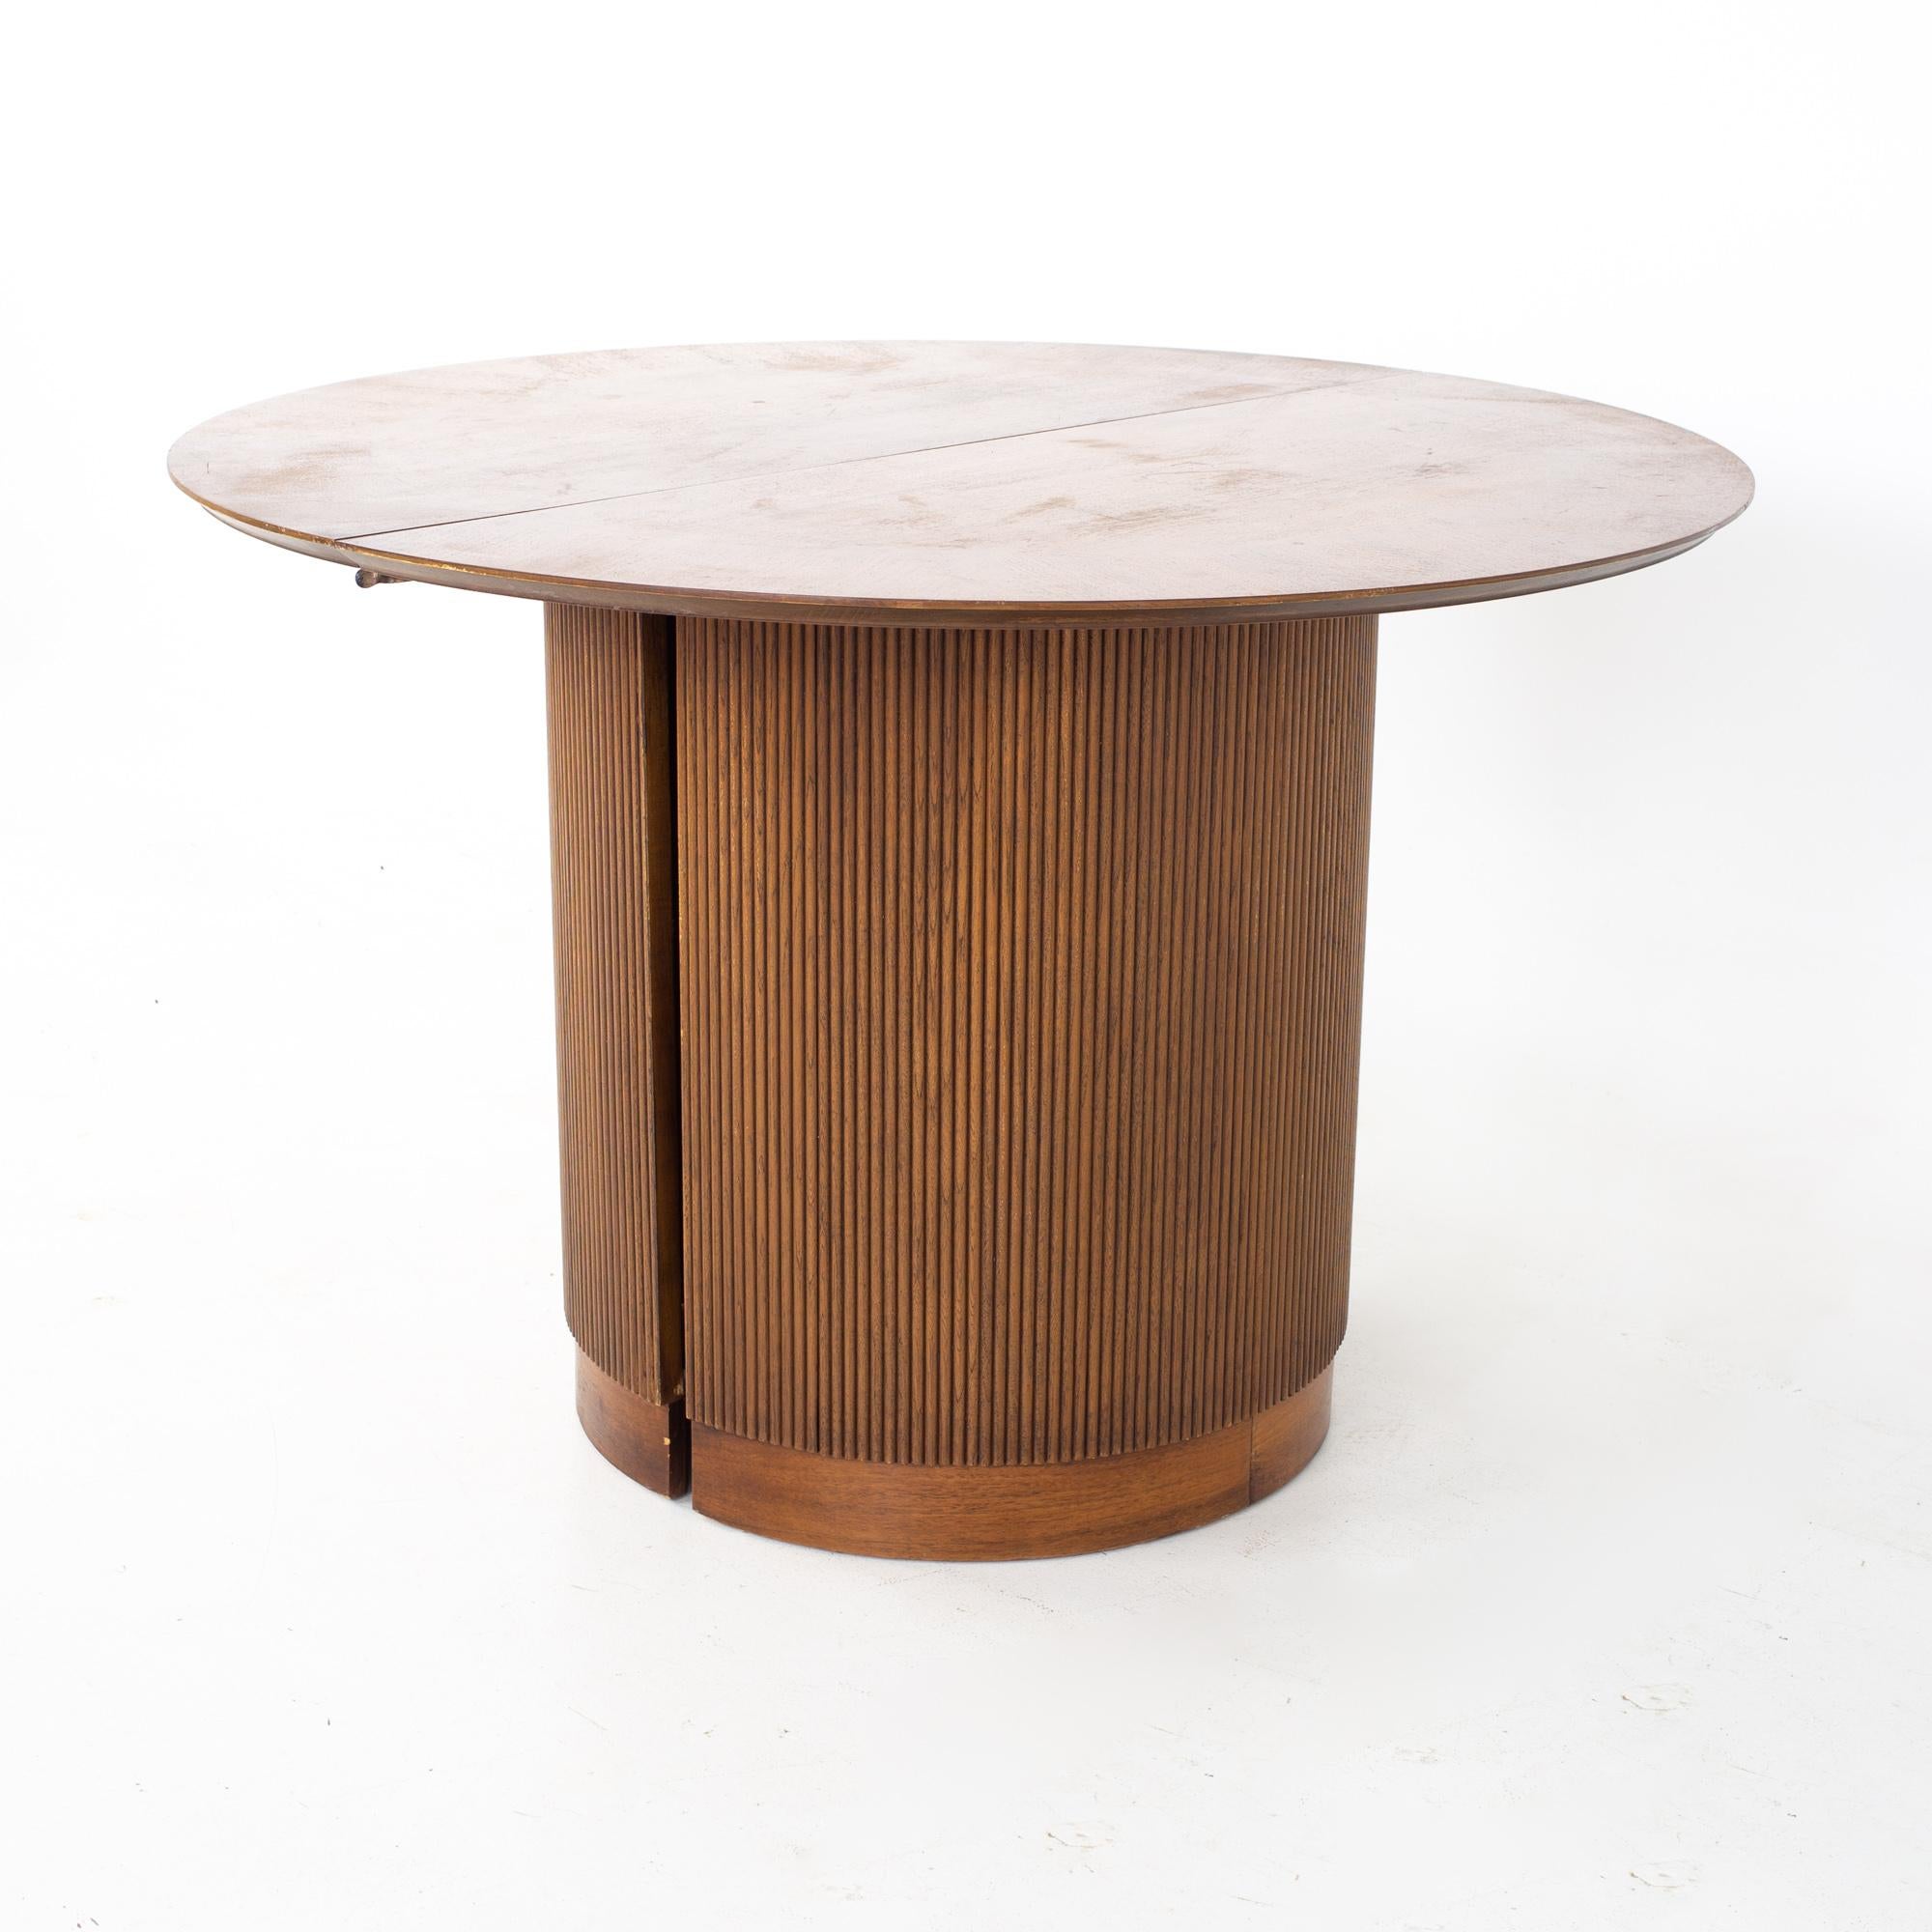 Lane first edition mid century walnut expanding round pedestal dining table.
Table measures: 44.25 wide x 44.25 deep x 29.5 inches high, with a chair clearance of 28.5 inches. Each leaf is 17.5 inches wide, making a maximum table width of 79.25